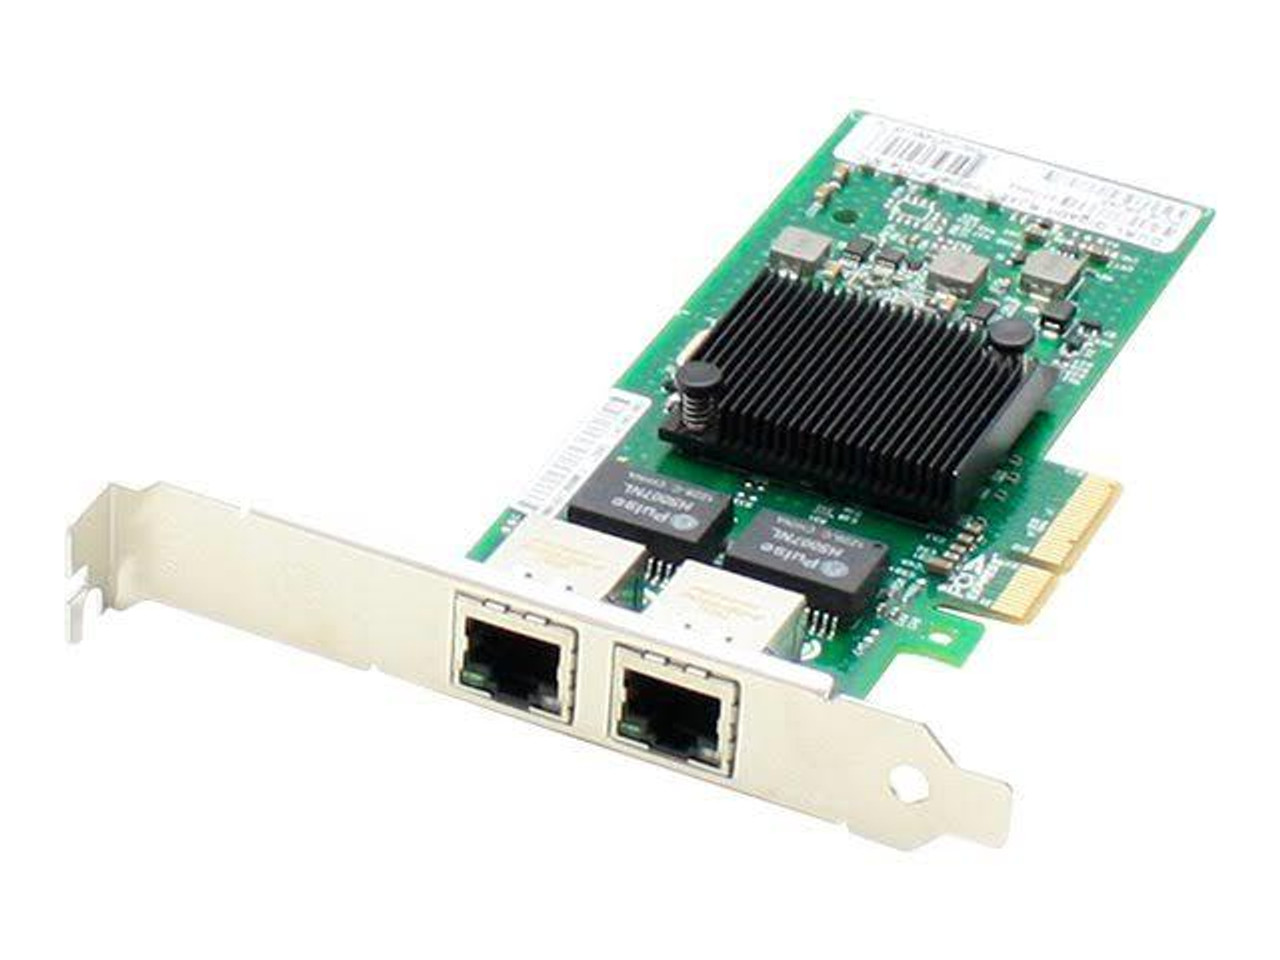 HPE 669281-001 Dual Port 10GbE 560FLR-SFP+ Network Adapter for G8-G10